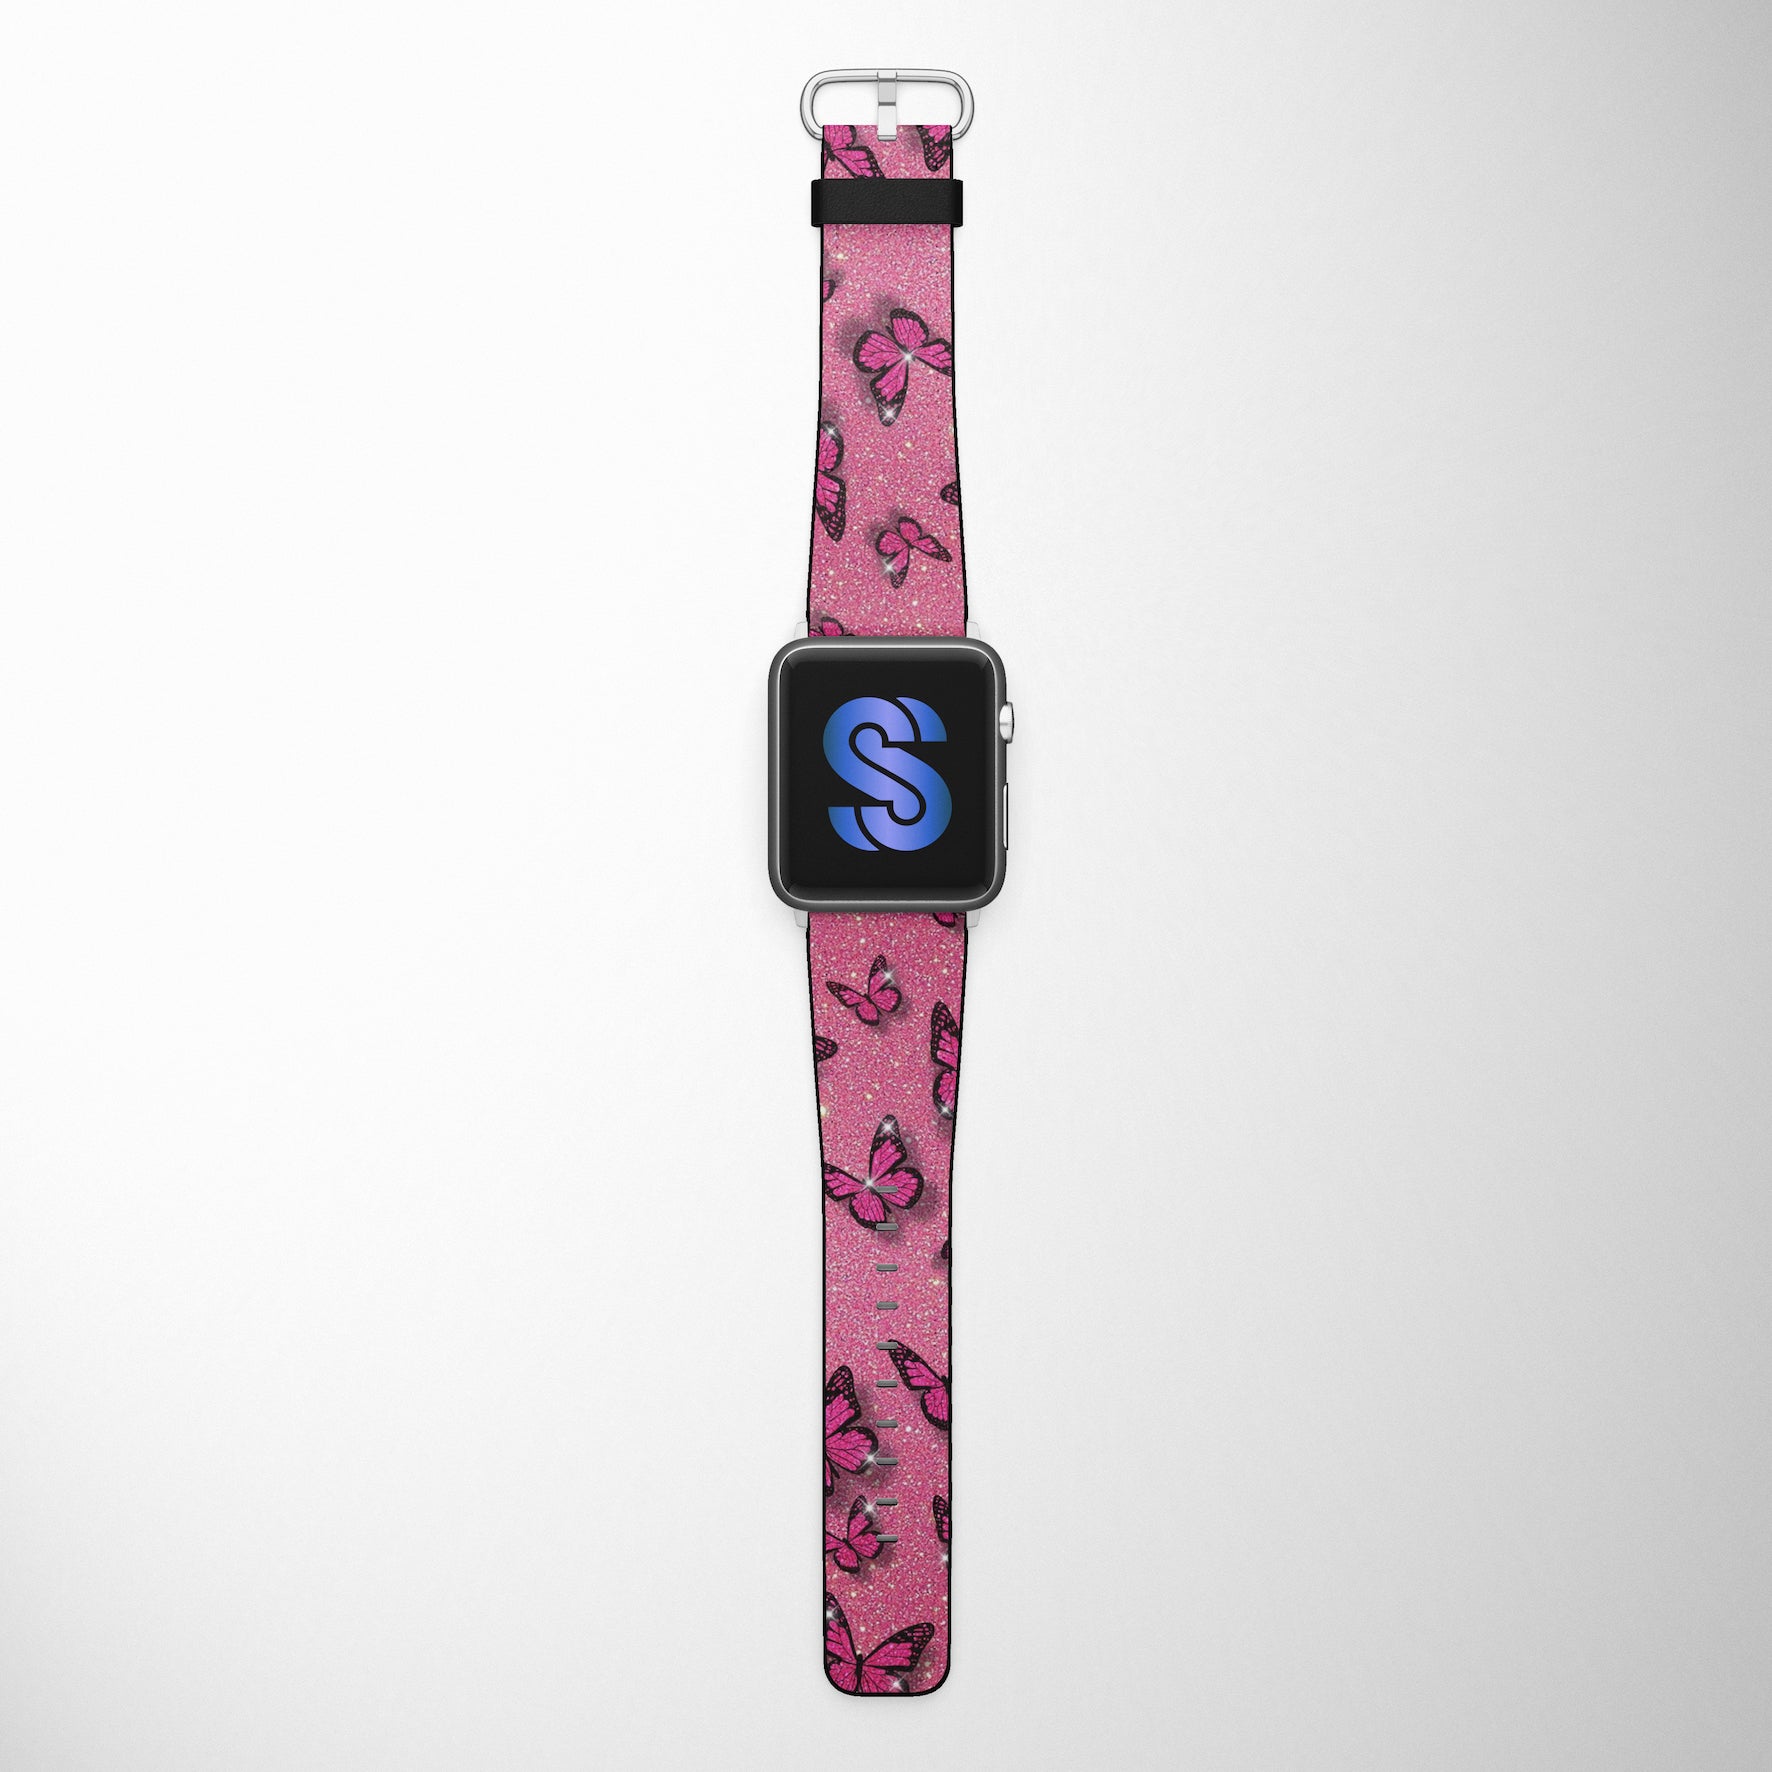 Pink Sparkly Butterflies Faux Leather Apple Watch Band for Apple Watch 1,2,3,4,5,6,SE - www.scottsy.com